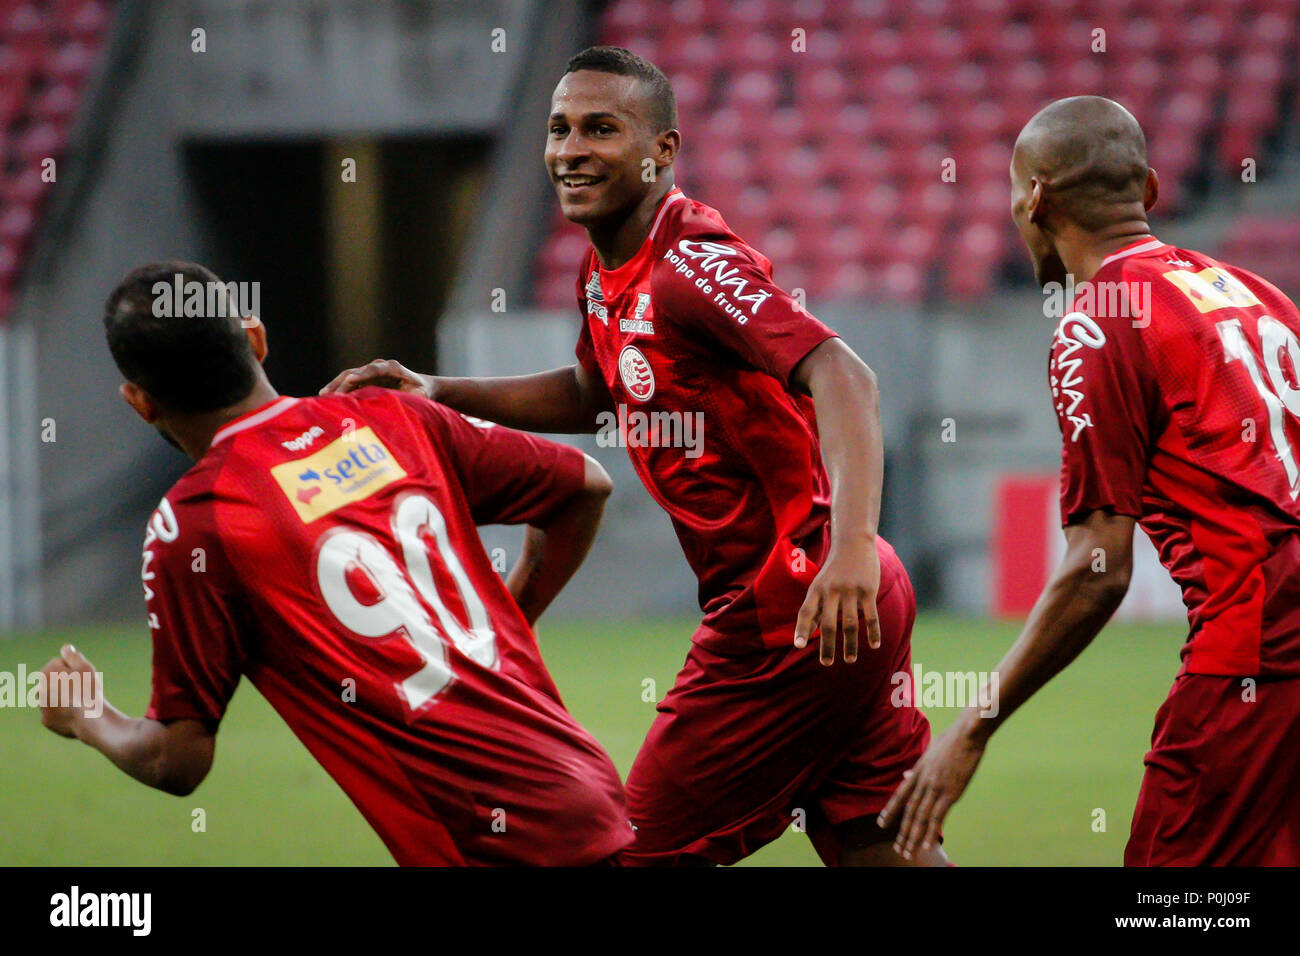 Page 2 - Robinho C High Resolution Stock Photography and Images - Alamy